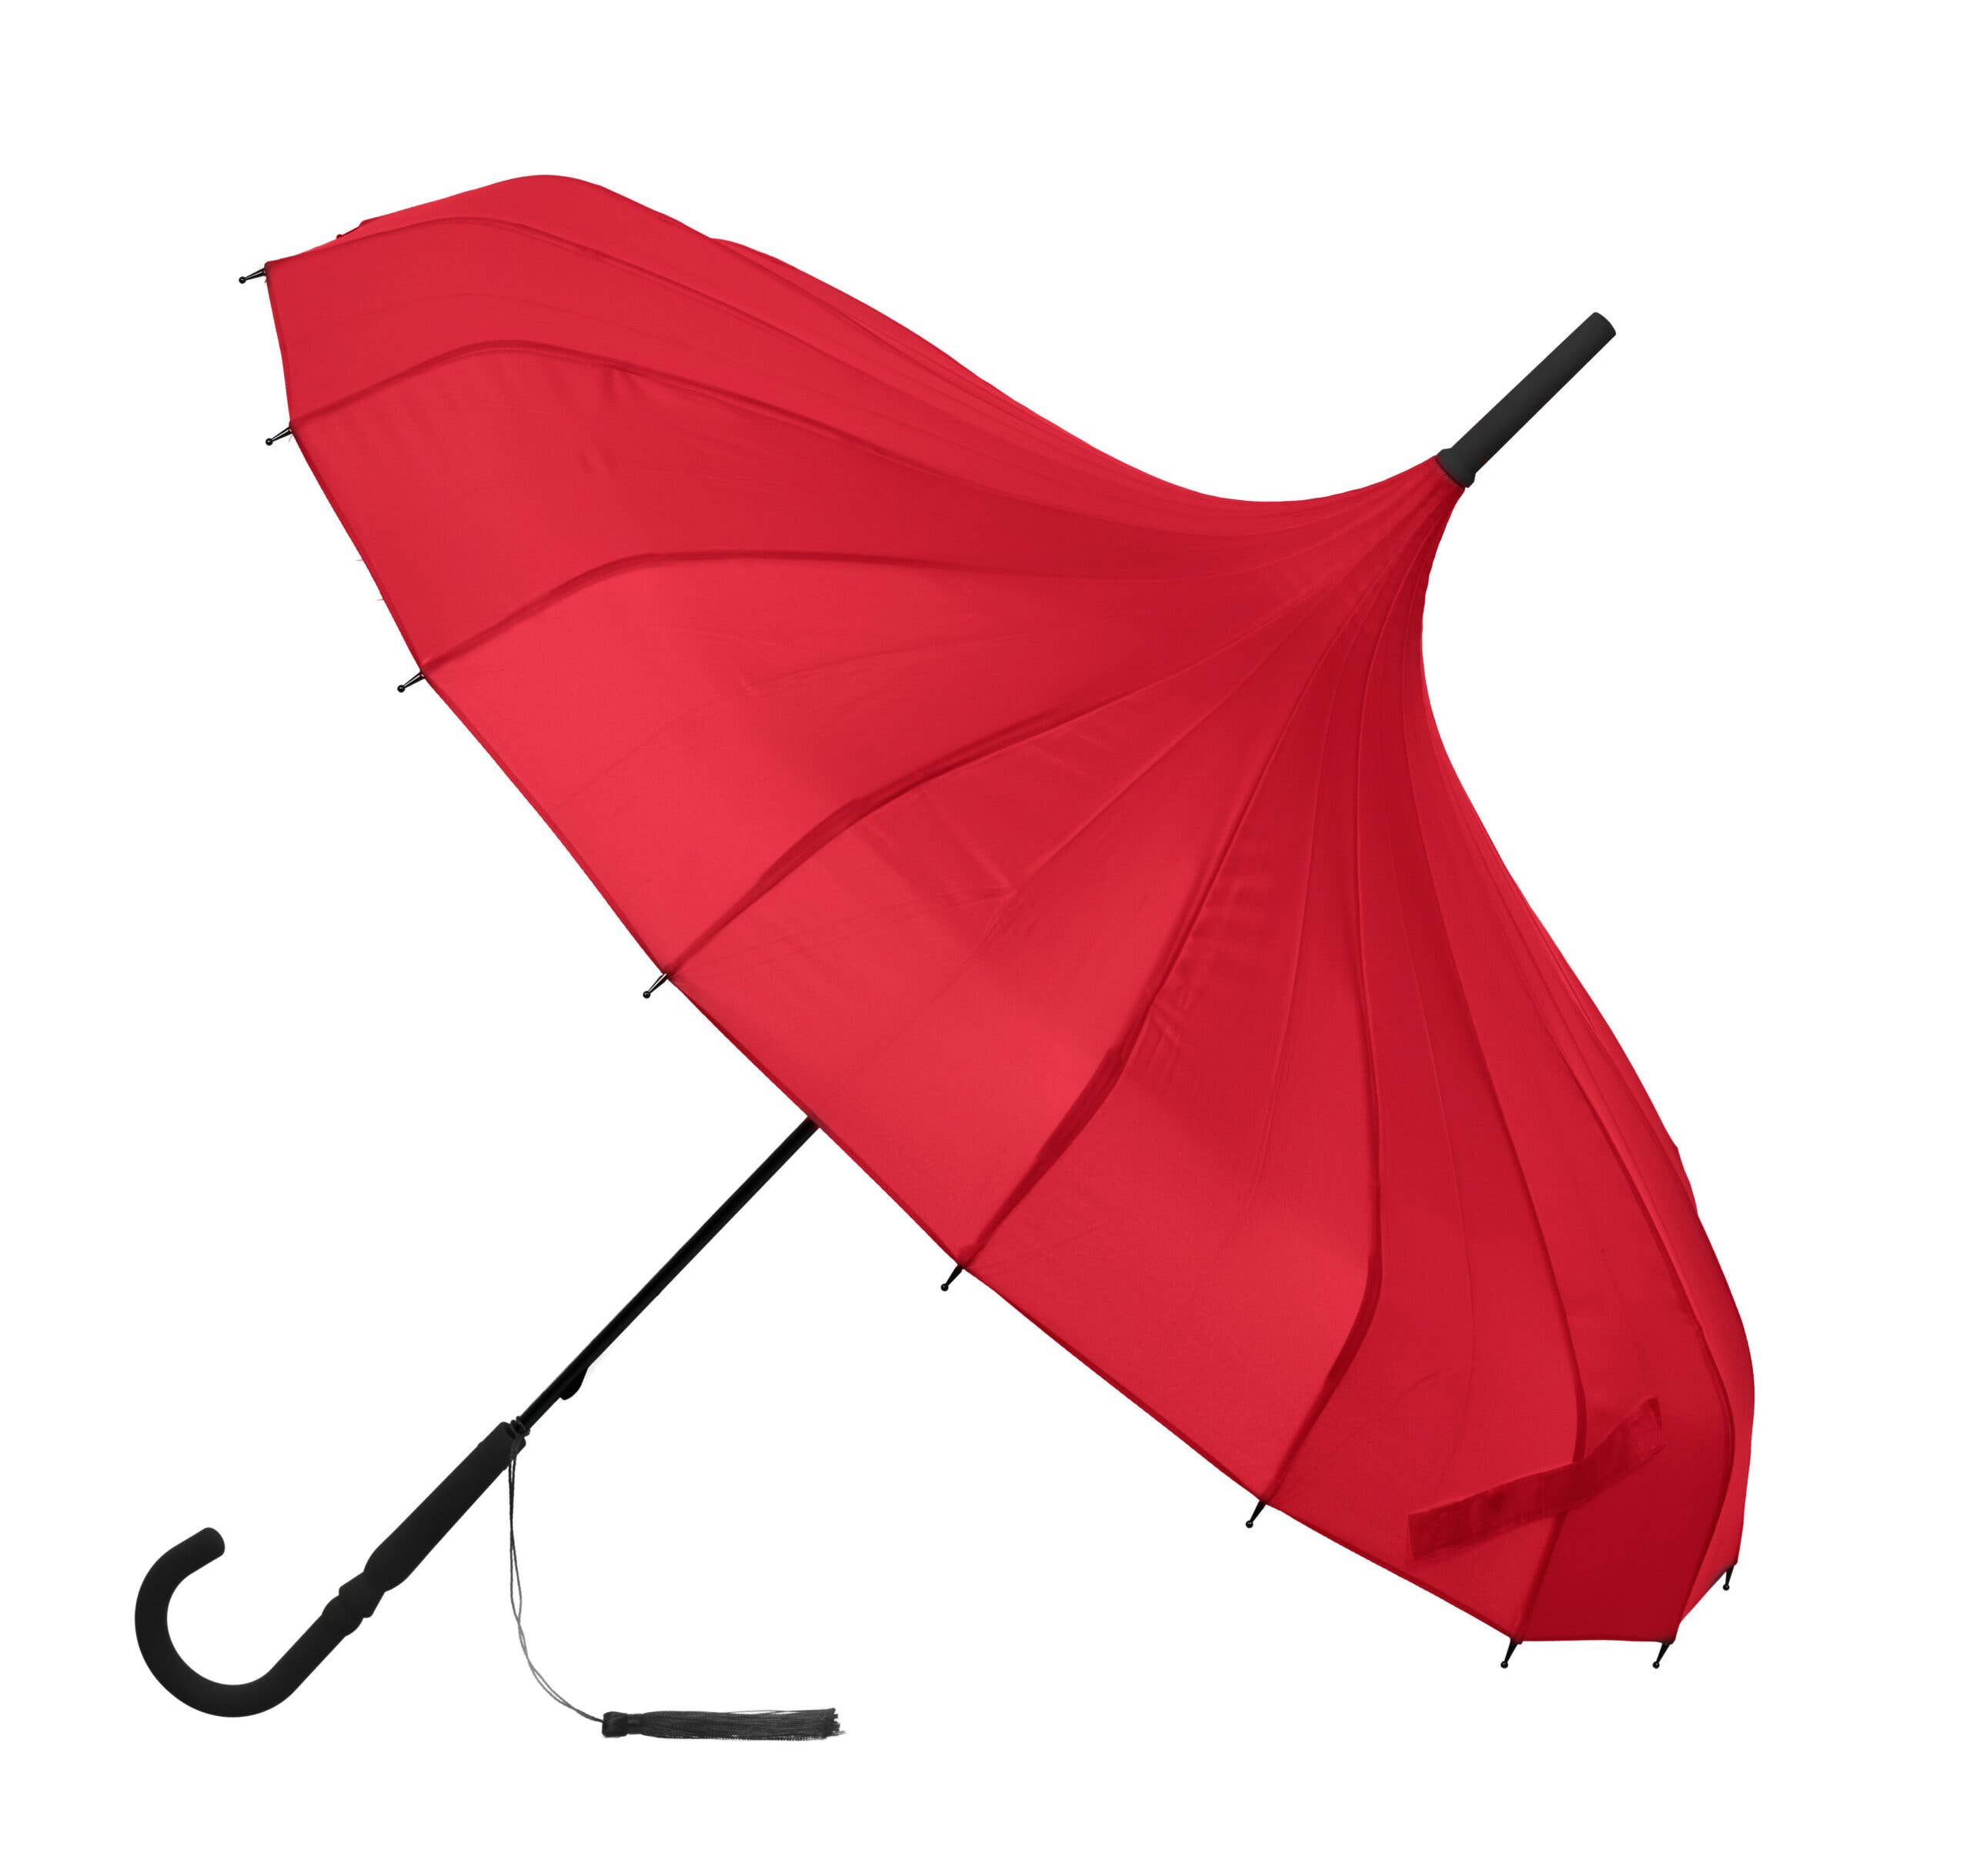 Boutique Classic Pagoda Umbrella in Red - The Nancy Smillie Shop - Art, Jewellery & Designer Gifts Glasgow